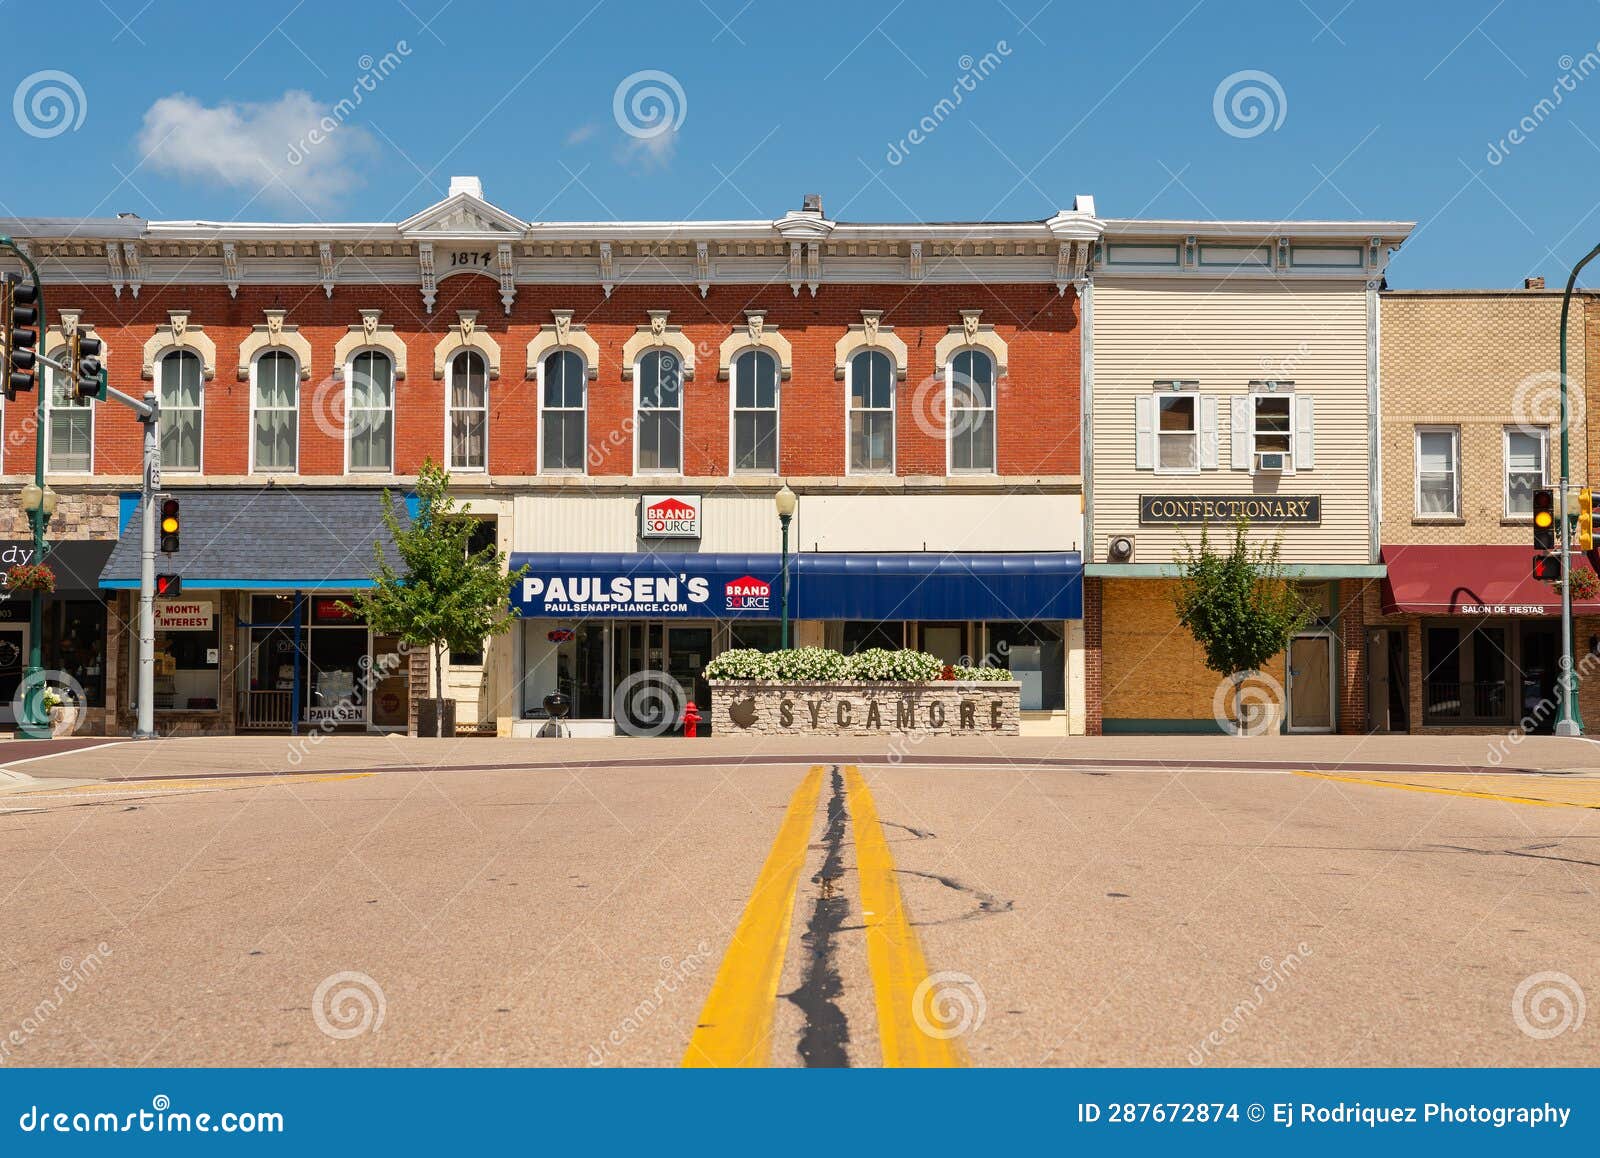 Downtown Sycamore editorial stock image. Image of landmark - 287672874